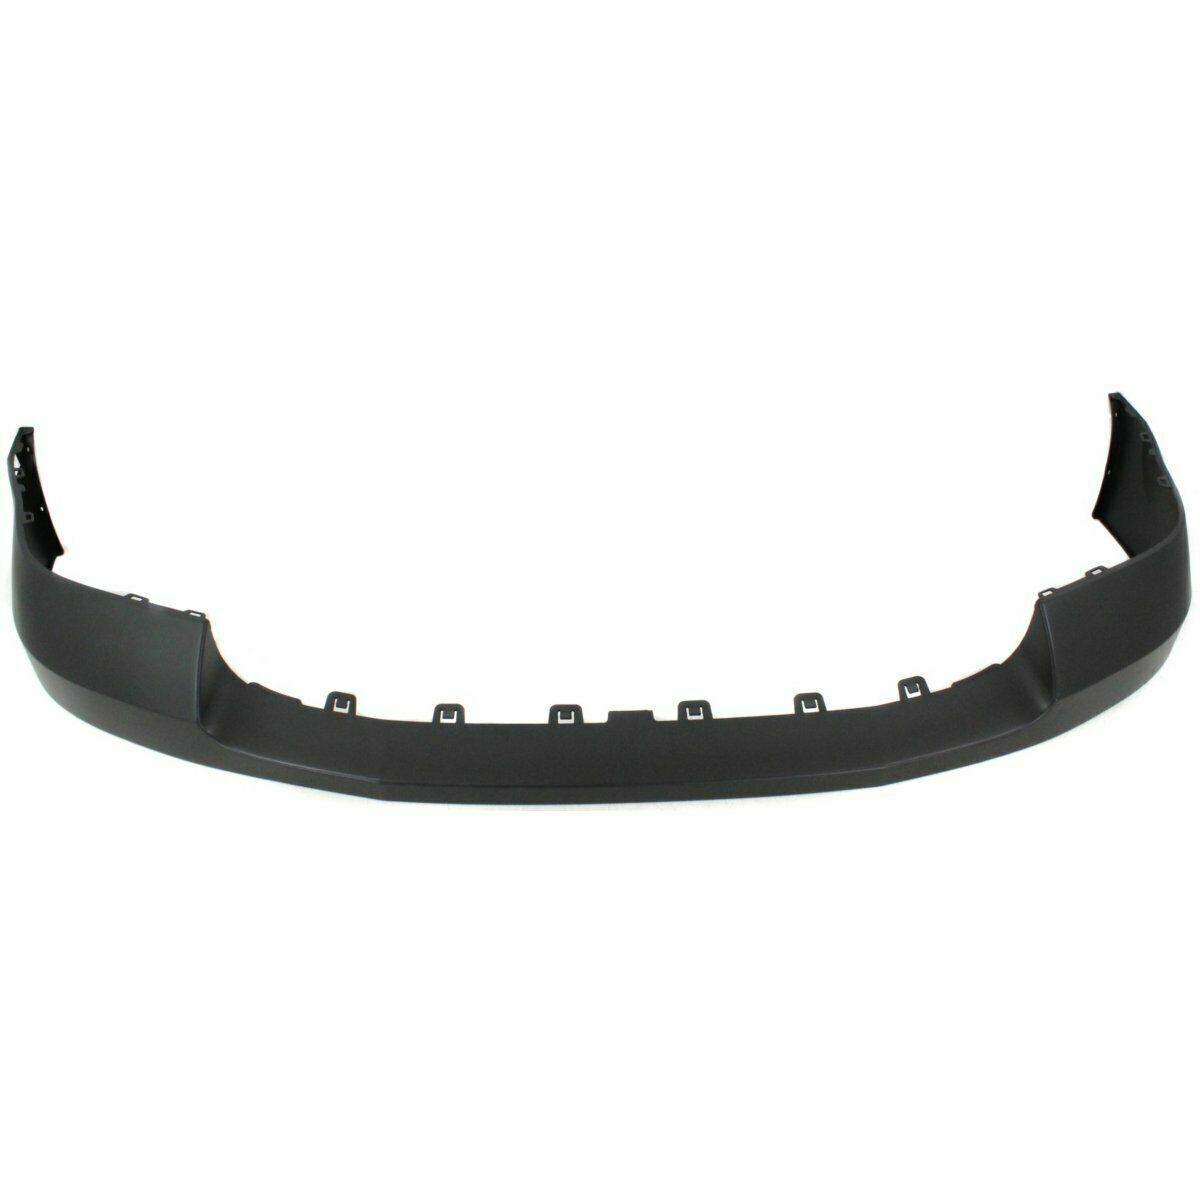 2011-2014 GMC SIERRA; Front Bumper Cover upper; Painted to Match